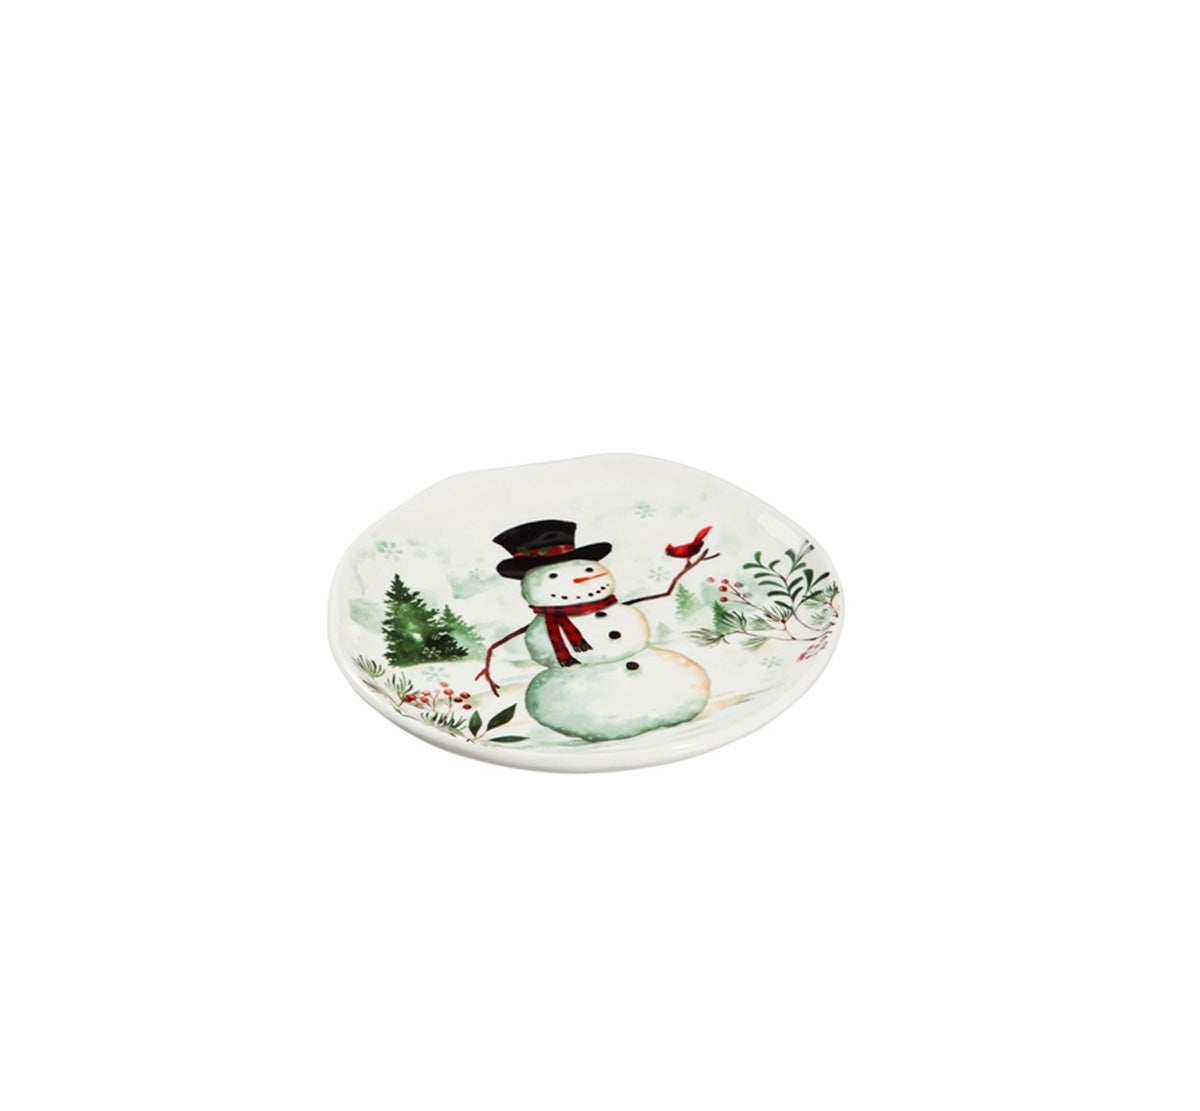 Appetizer Plate, Christmas Heritage, Set of 4